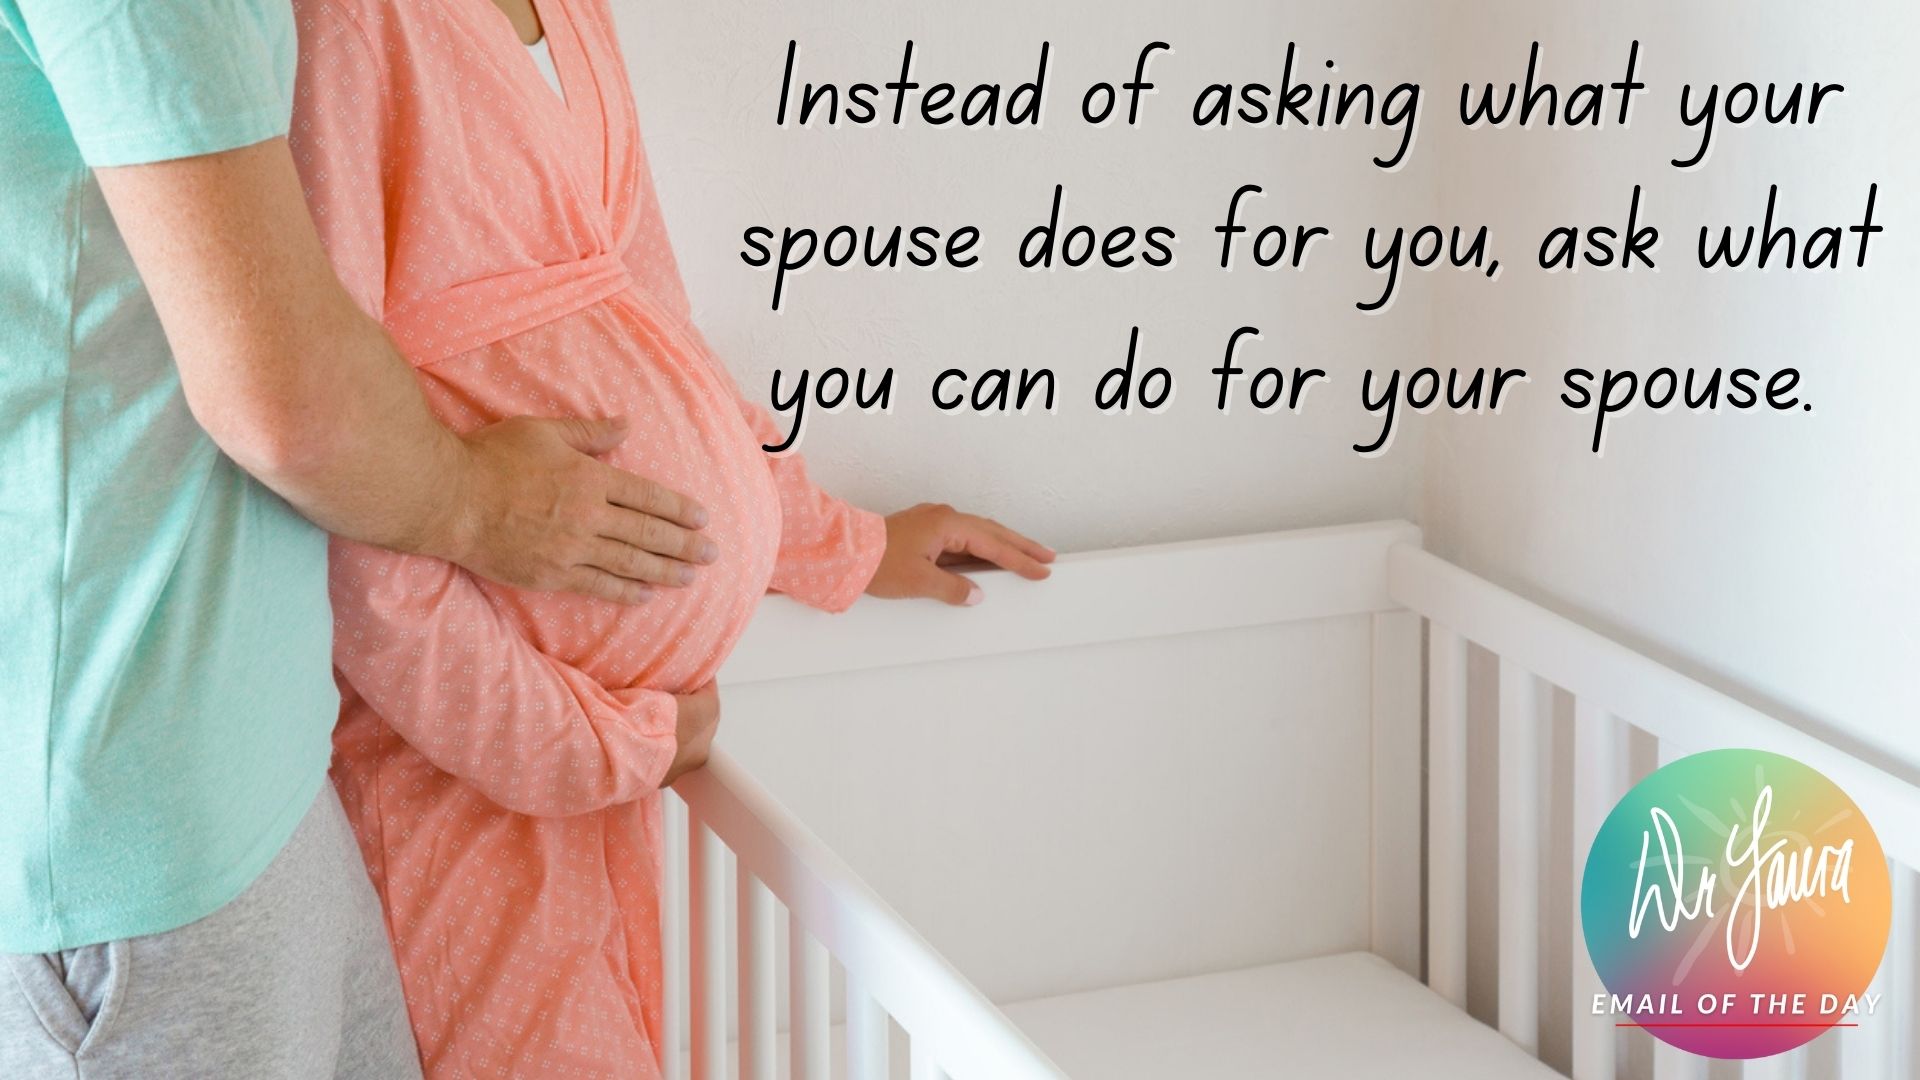 Email of the Day: Advice to an Expectant Father